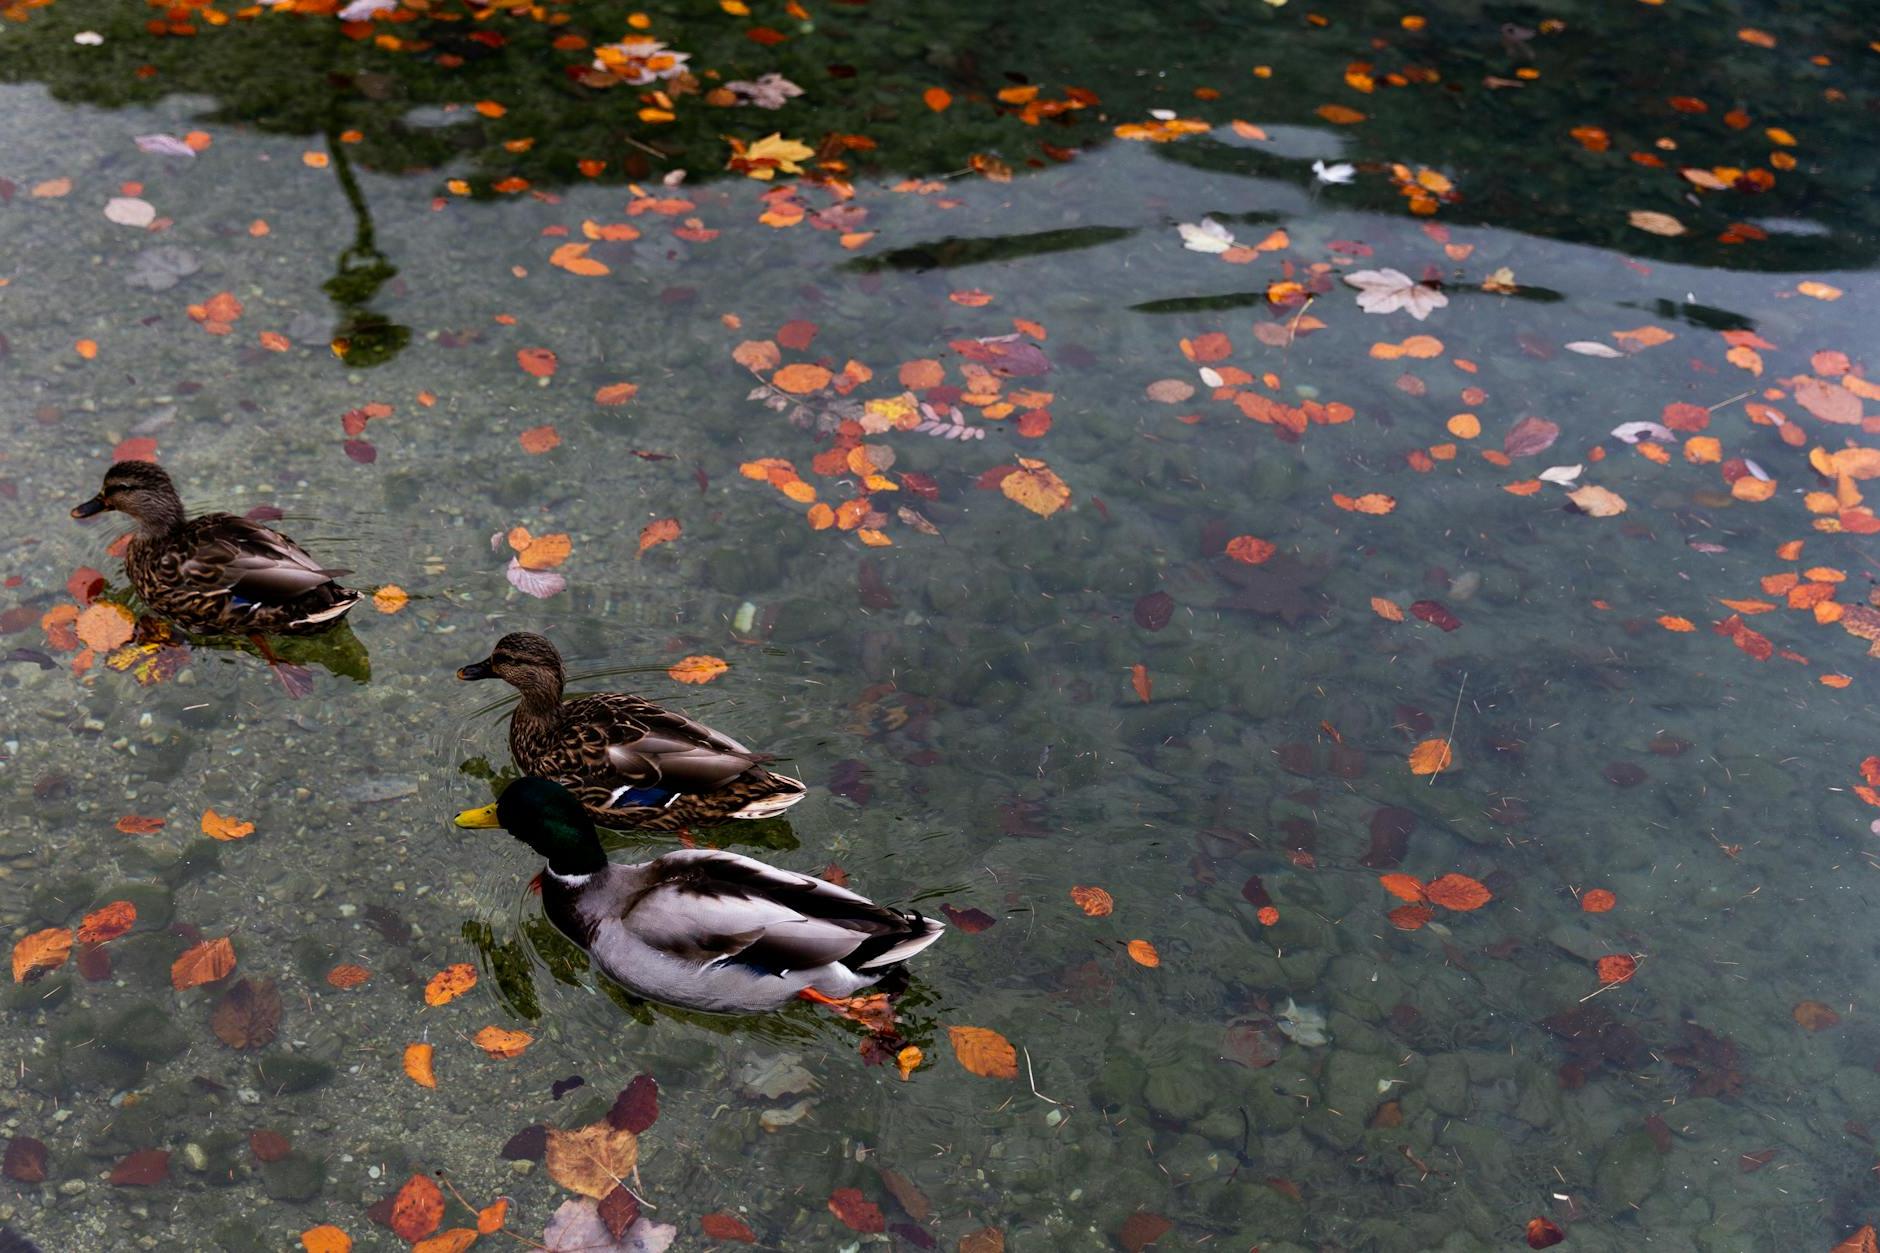 Wild ducks swimming in calm lake with colorful autumnal leaves in water in park